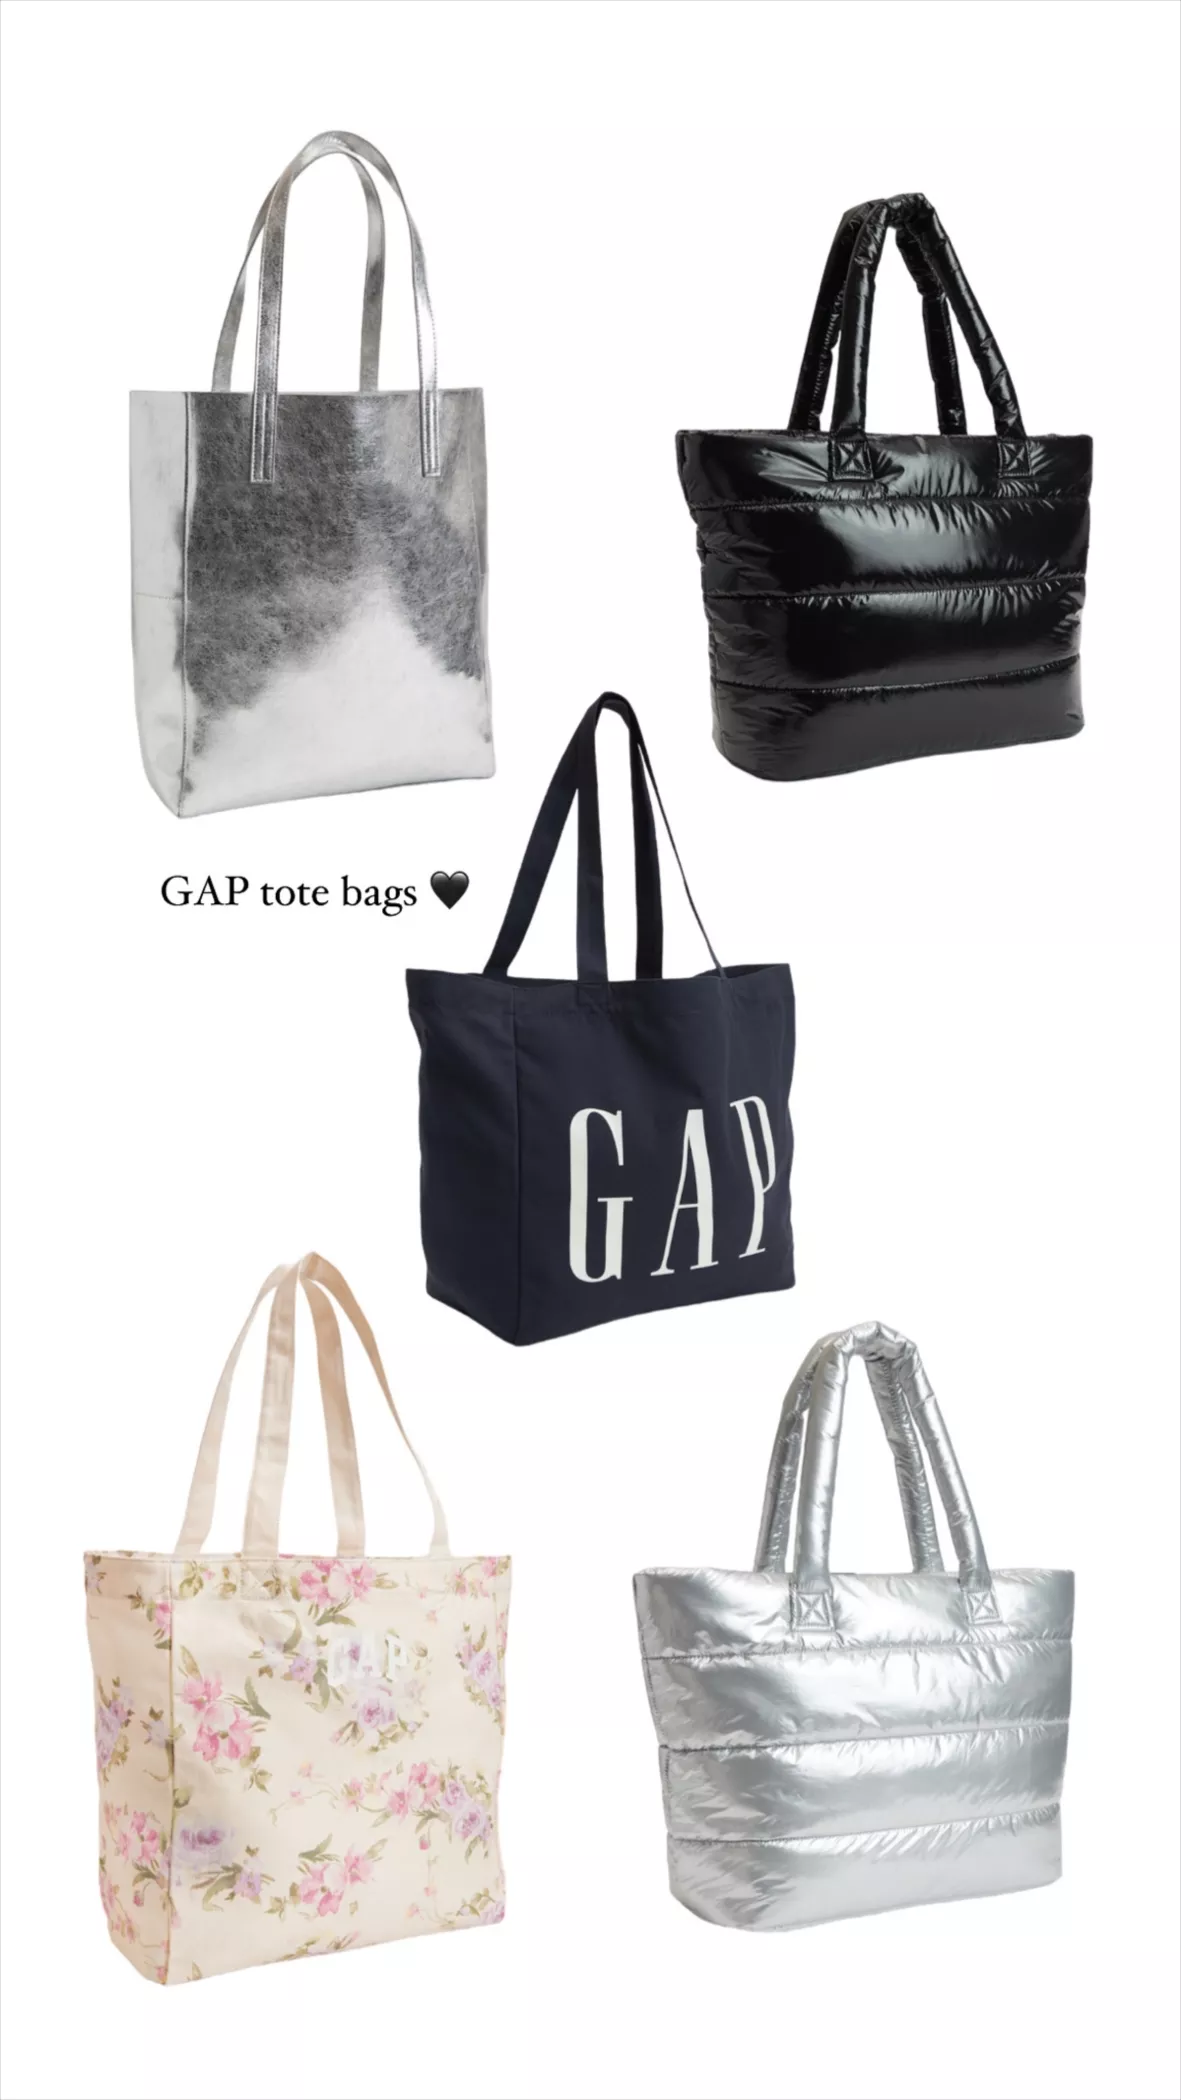 High Quality White Tote Bag by aesthetics for you